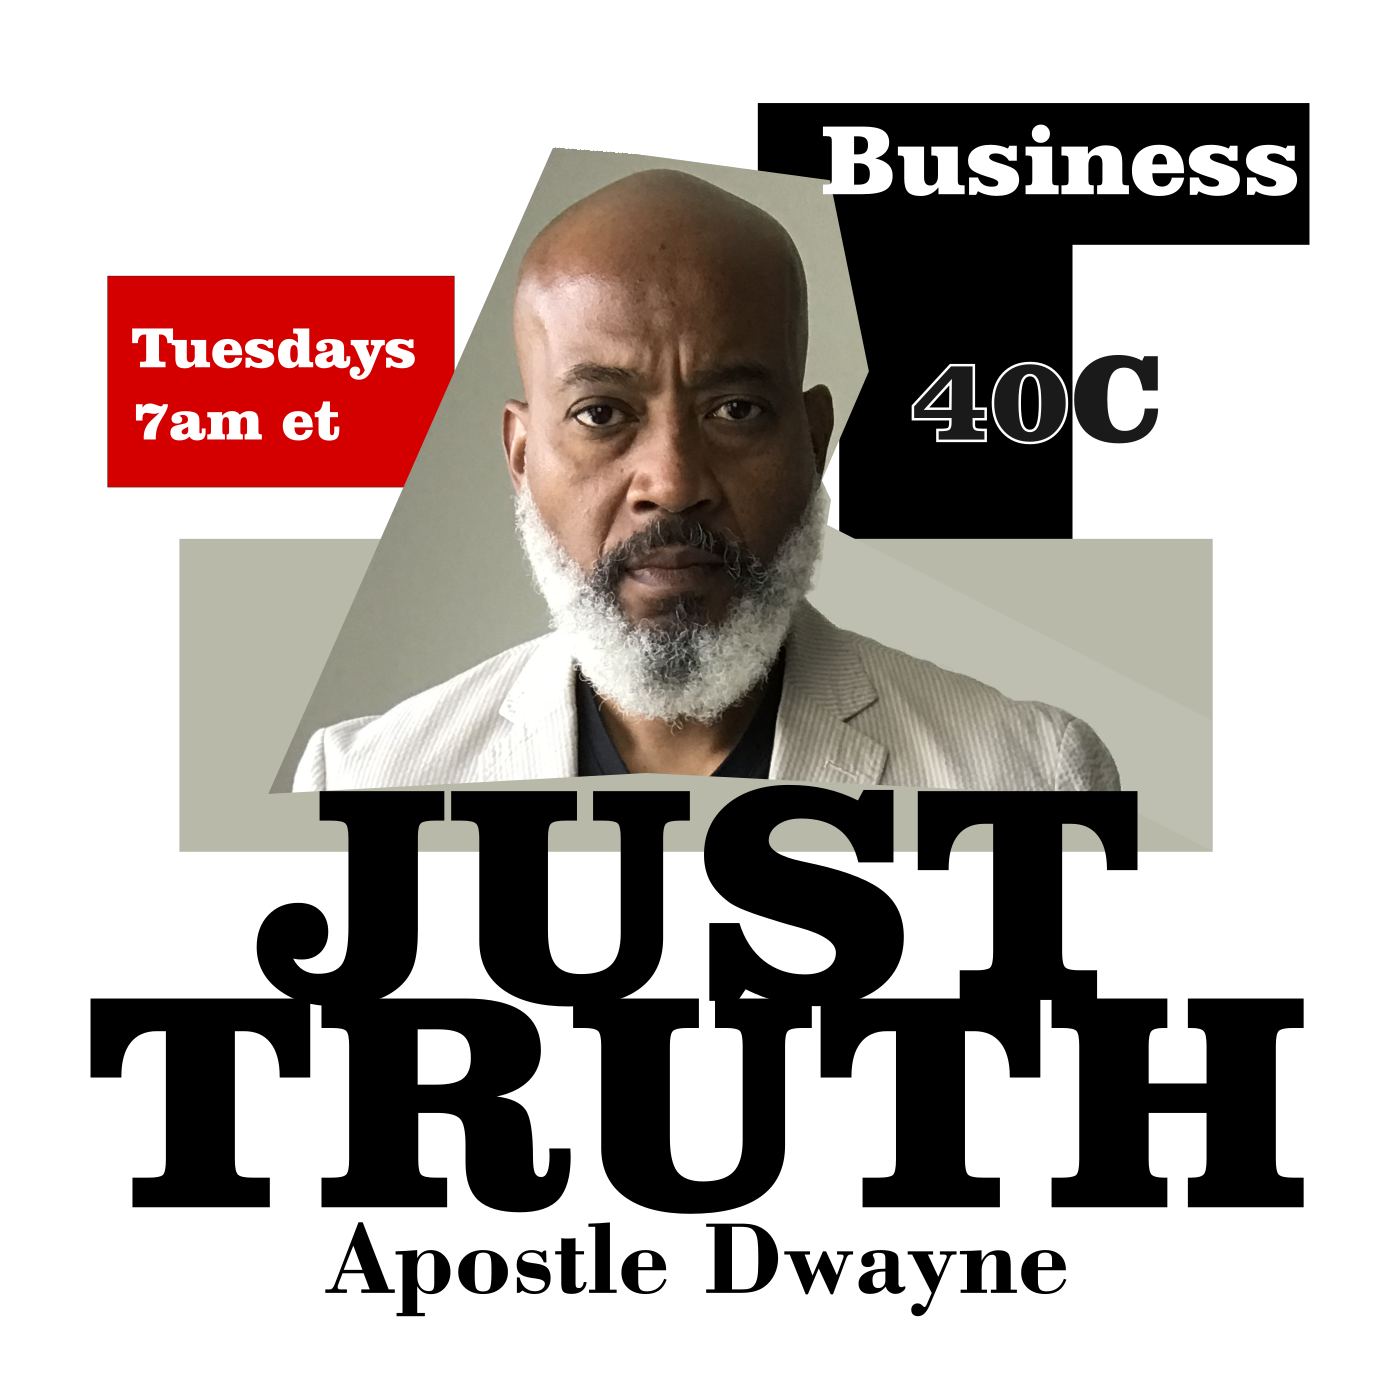 Show artwork for Business with Apostle Dwayne